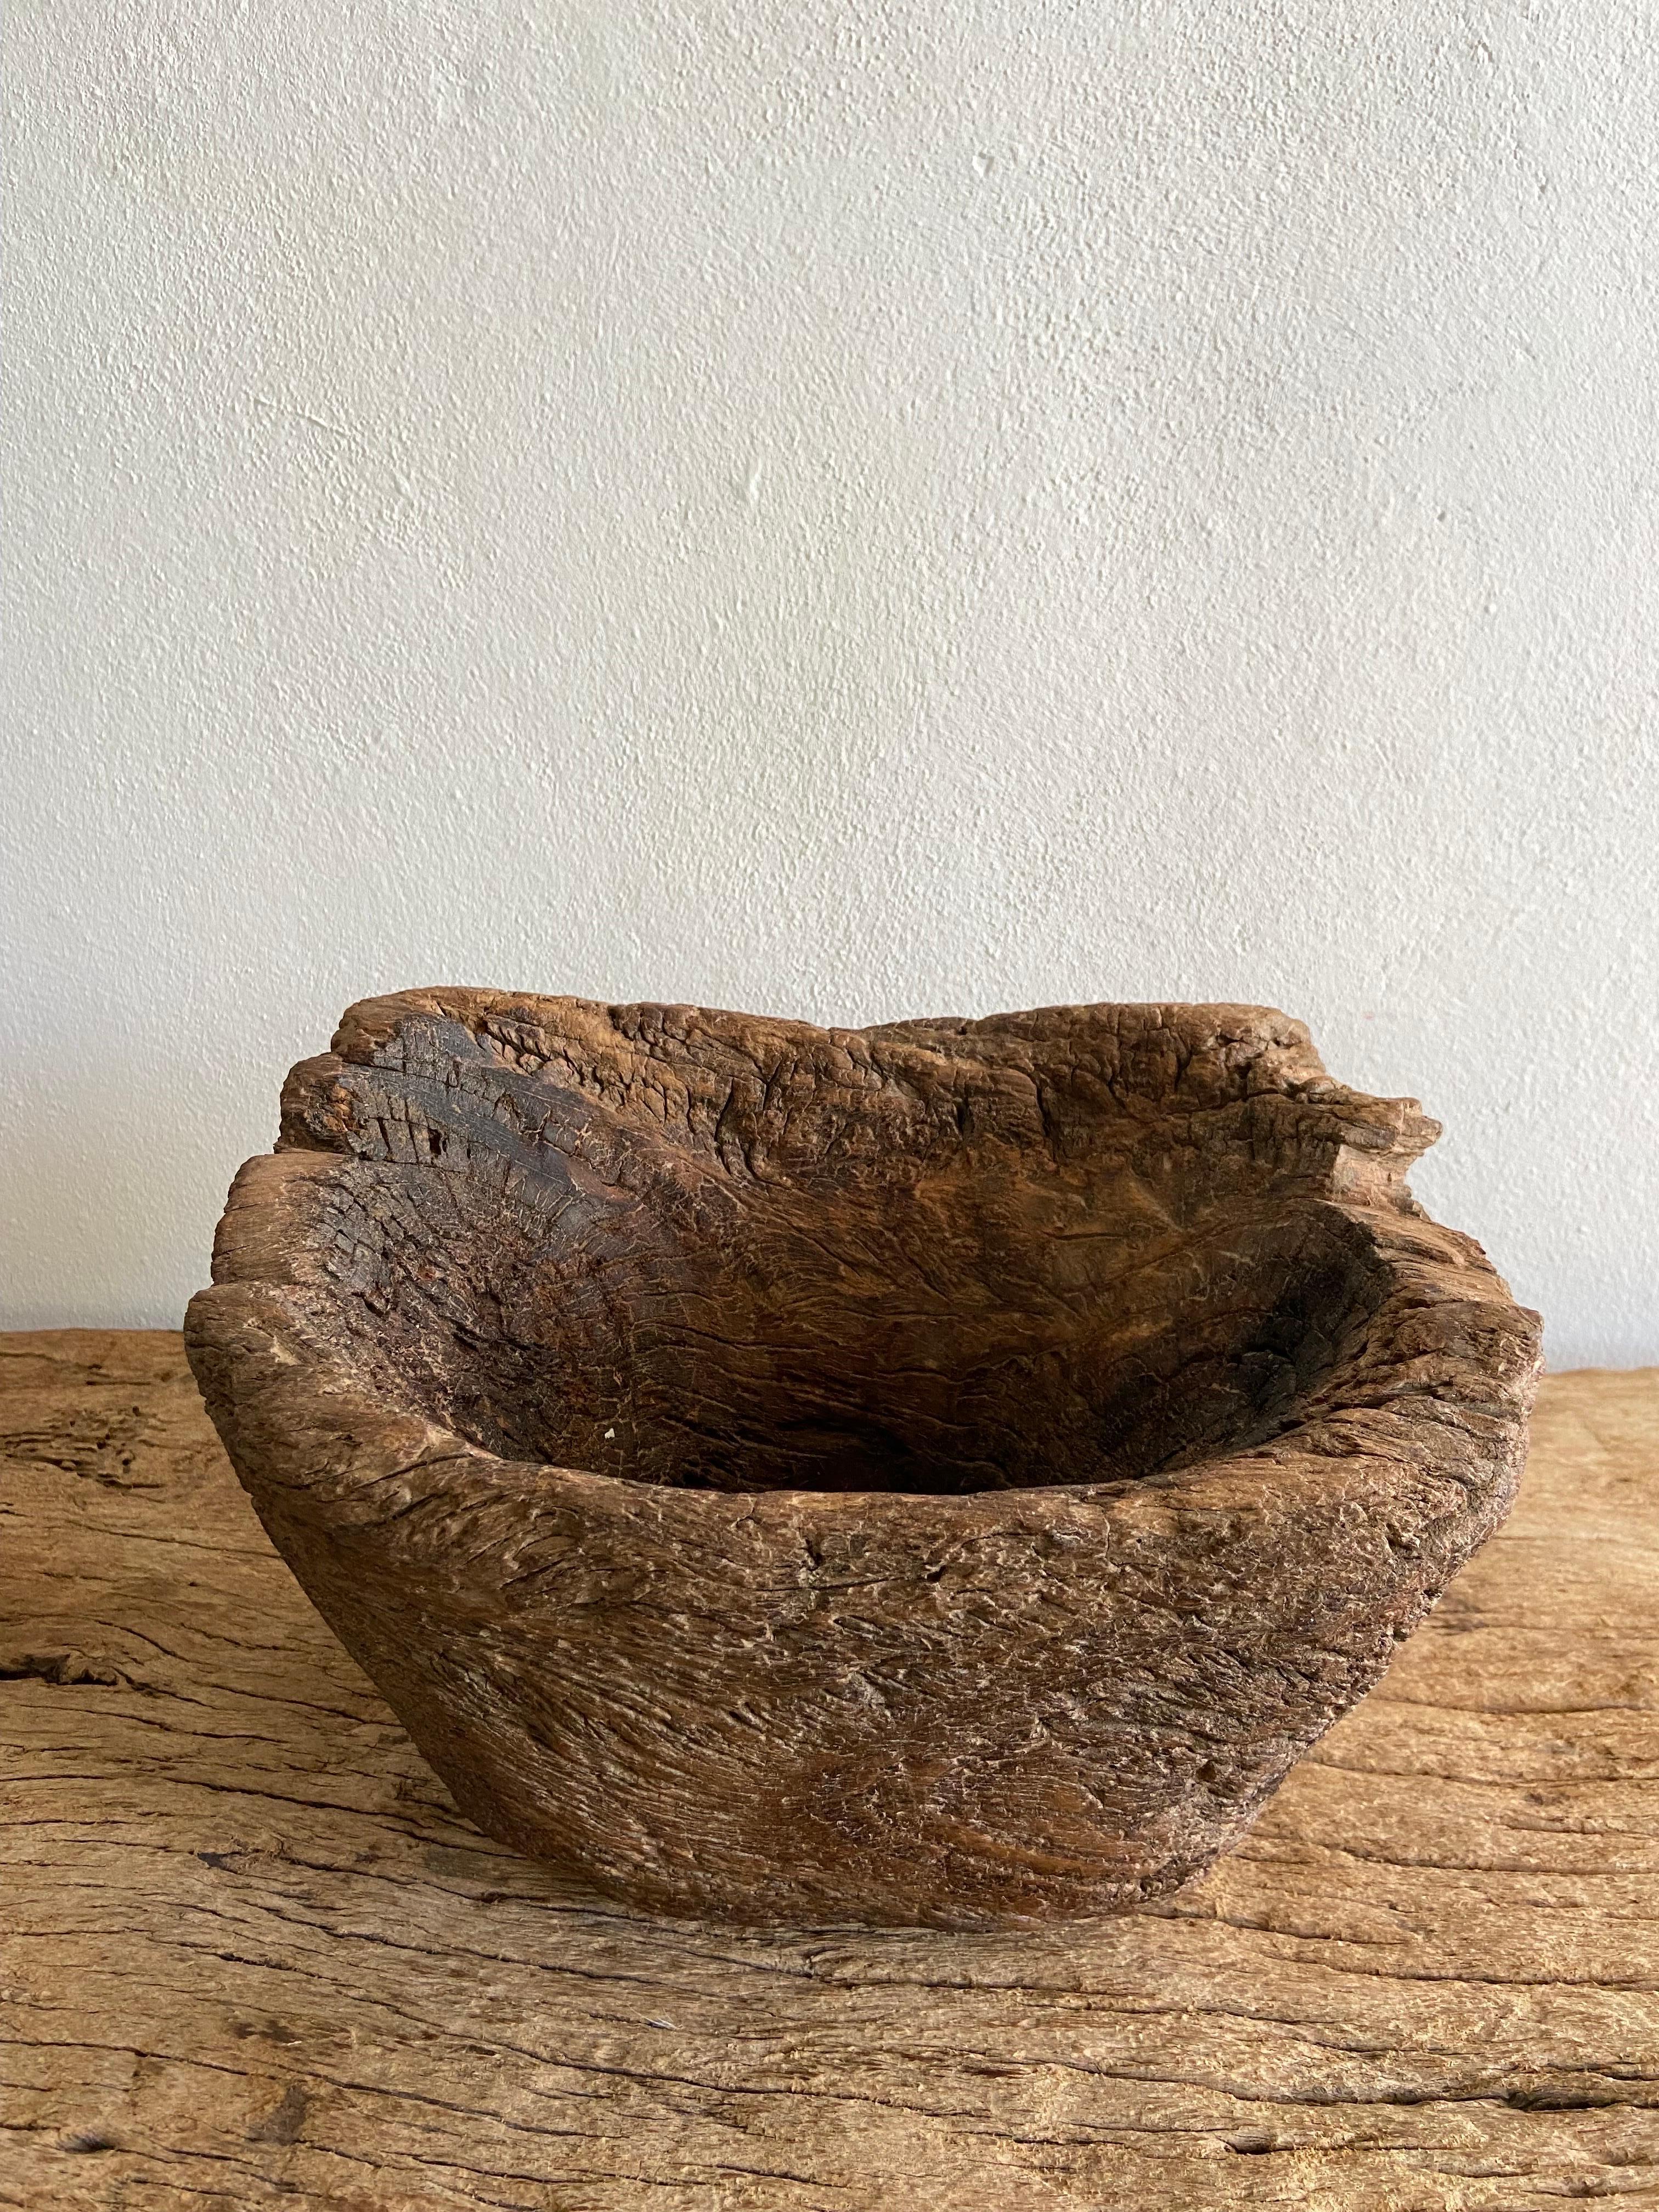 Early 20th century wood mortar from Veracruz, Mexico. Originally used to grind coffee, the unusual aspect of this mortar is its size. Wood mortars typically start at 16